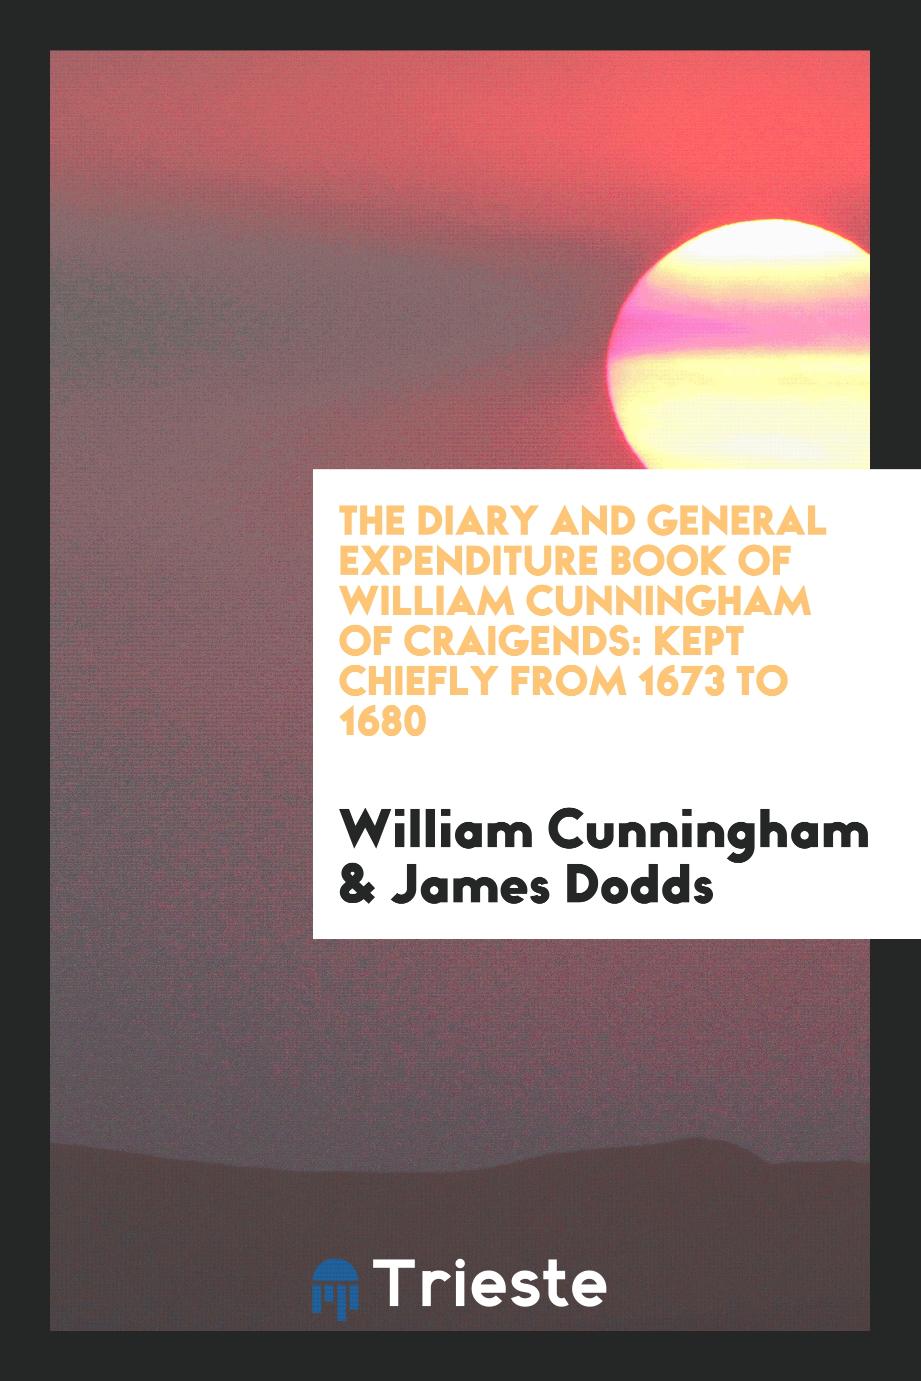 The diary and general expenditure book of William Cunningham of Craigends: kept chiefly from 1673 to 1680